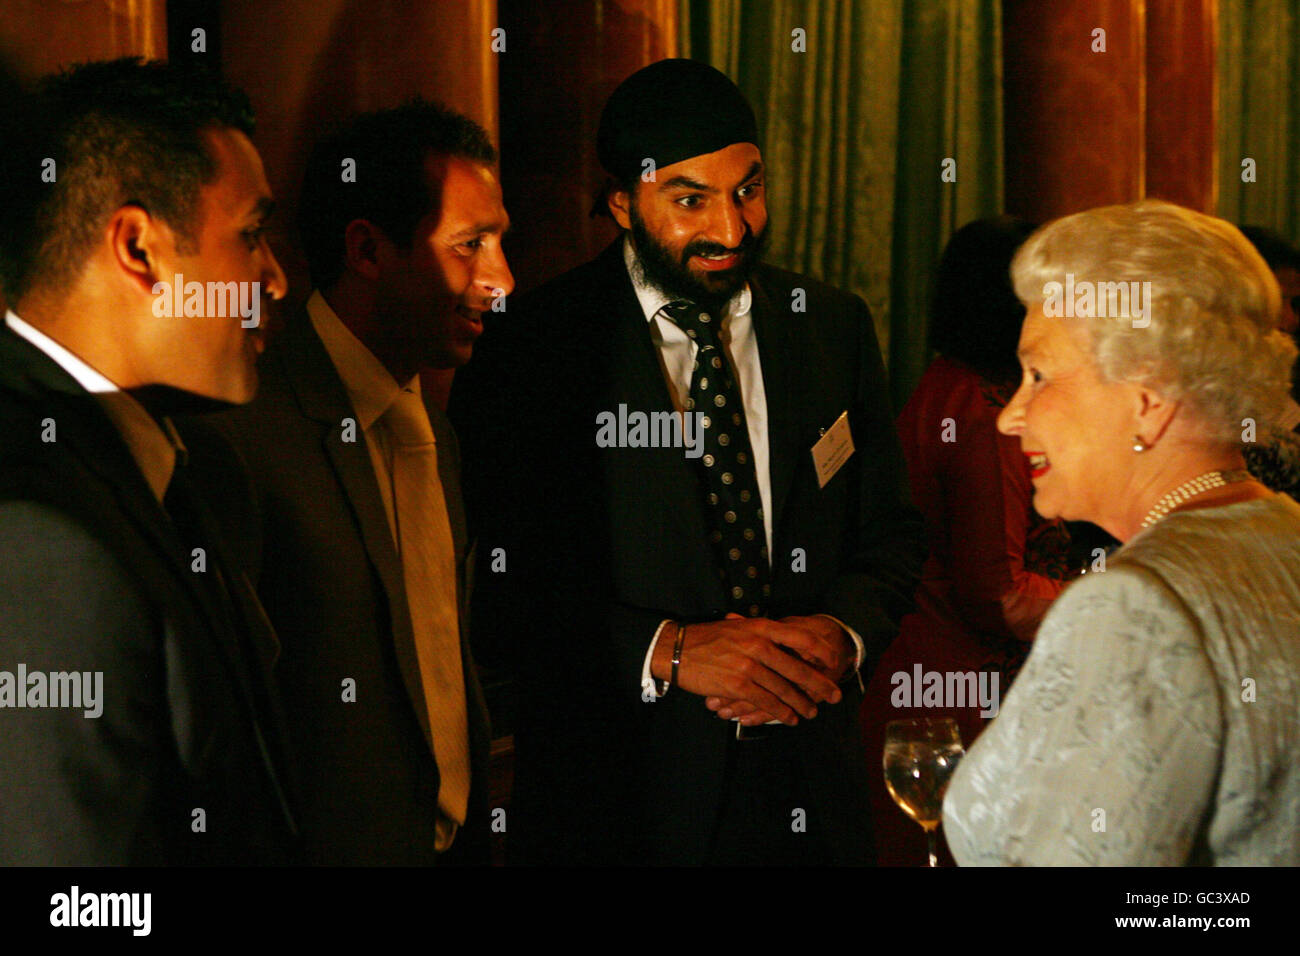 Queen Elizabeth II meets sportsmen (left to right) Samit Patel, Michael Chopra and Monty Panesar, after having watched a performance by nutkhut, a London-based British-Indian dance company, who had presented an extract of Bollywood Steps, during a reception inside the ballroom of Buckingham Palace in central London. Stock Photo